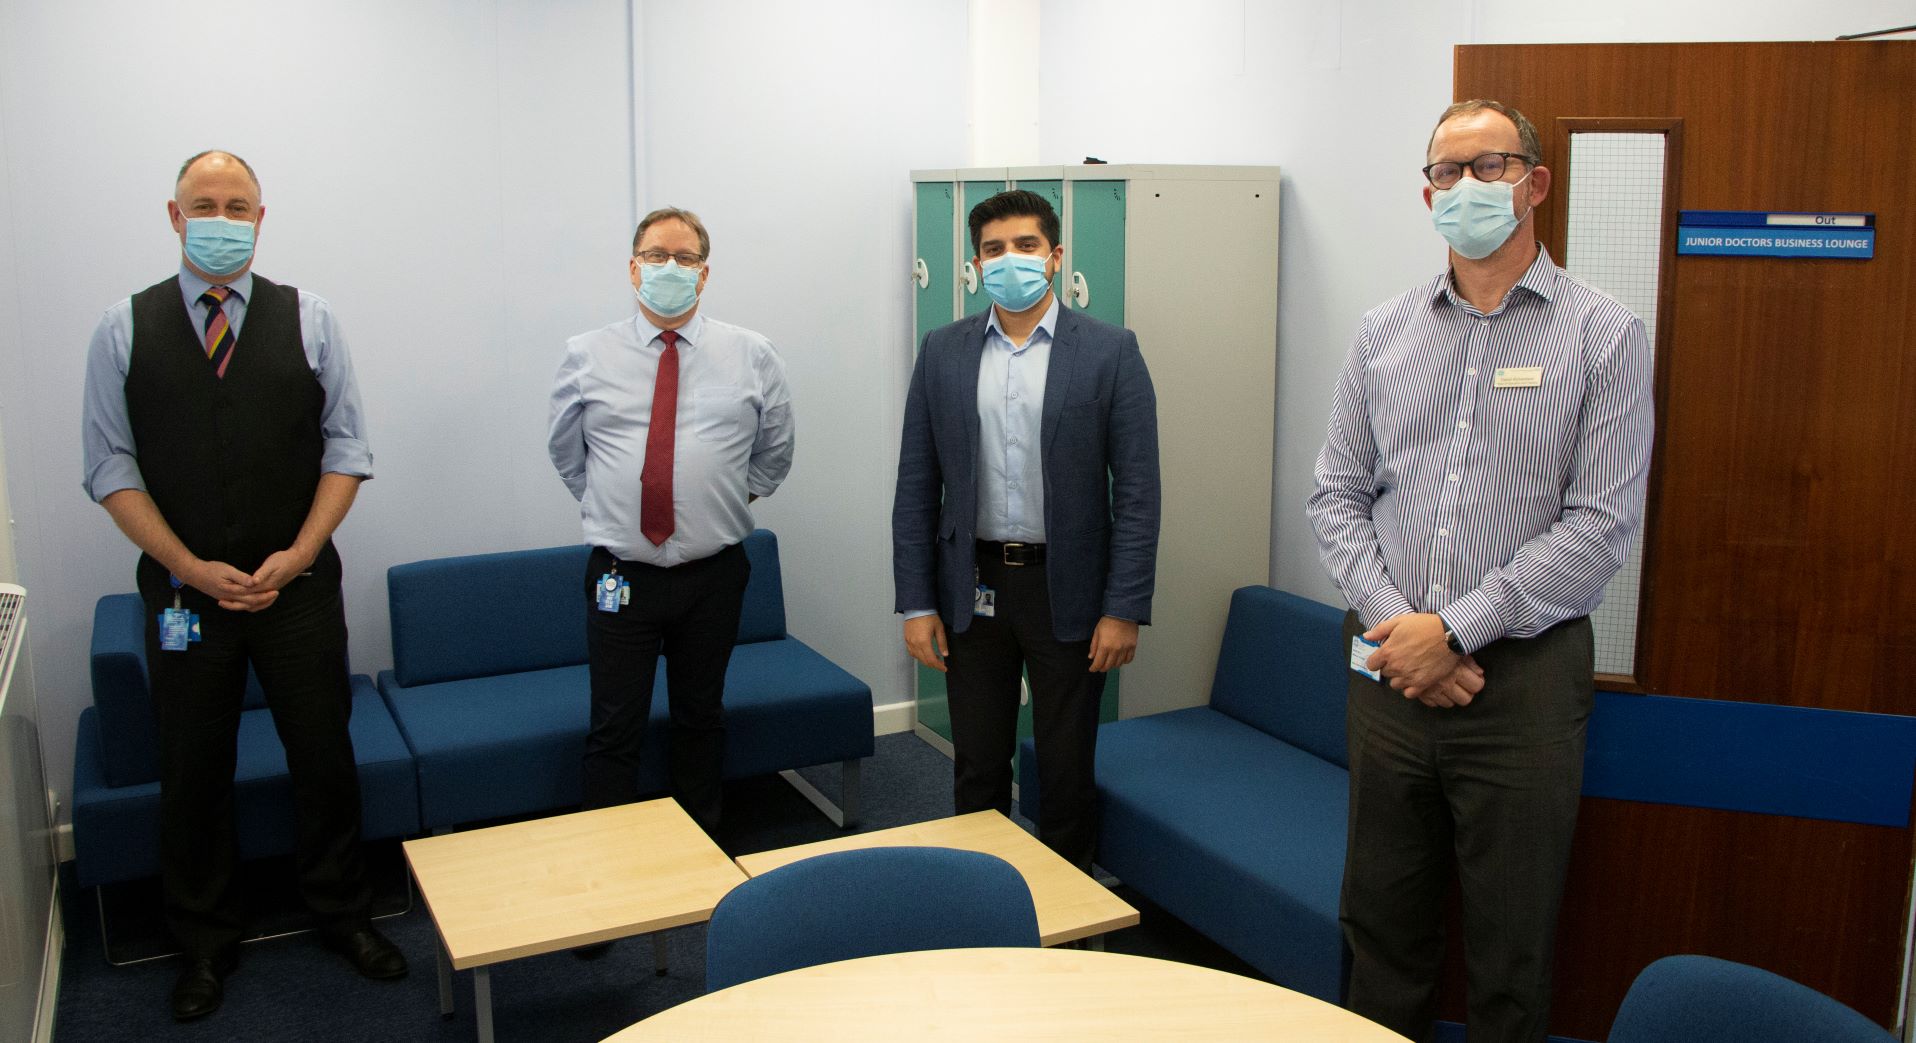 New ‘business lounge’ for junior doctors opens